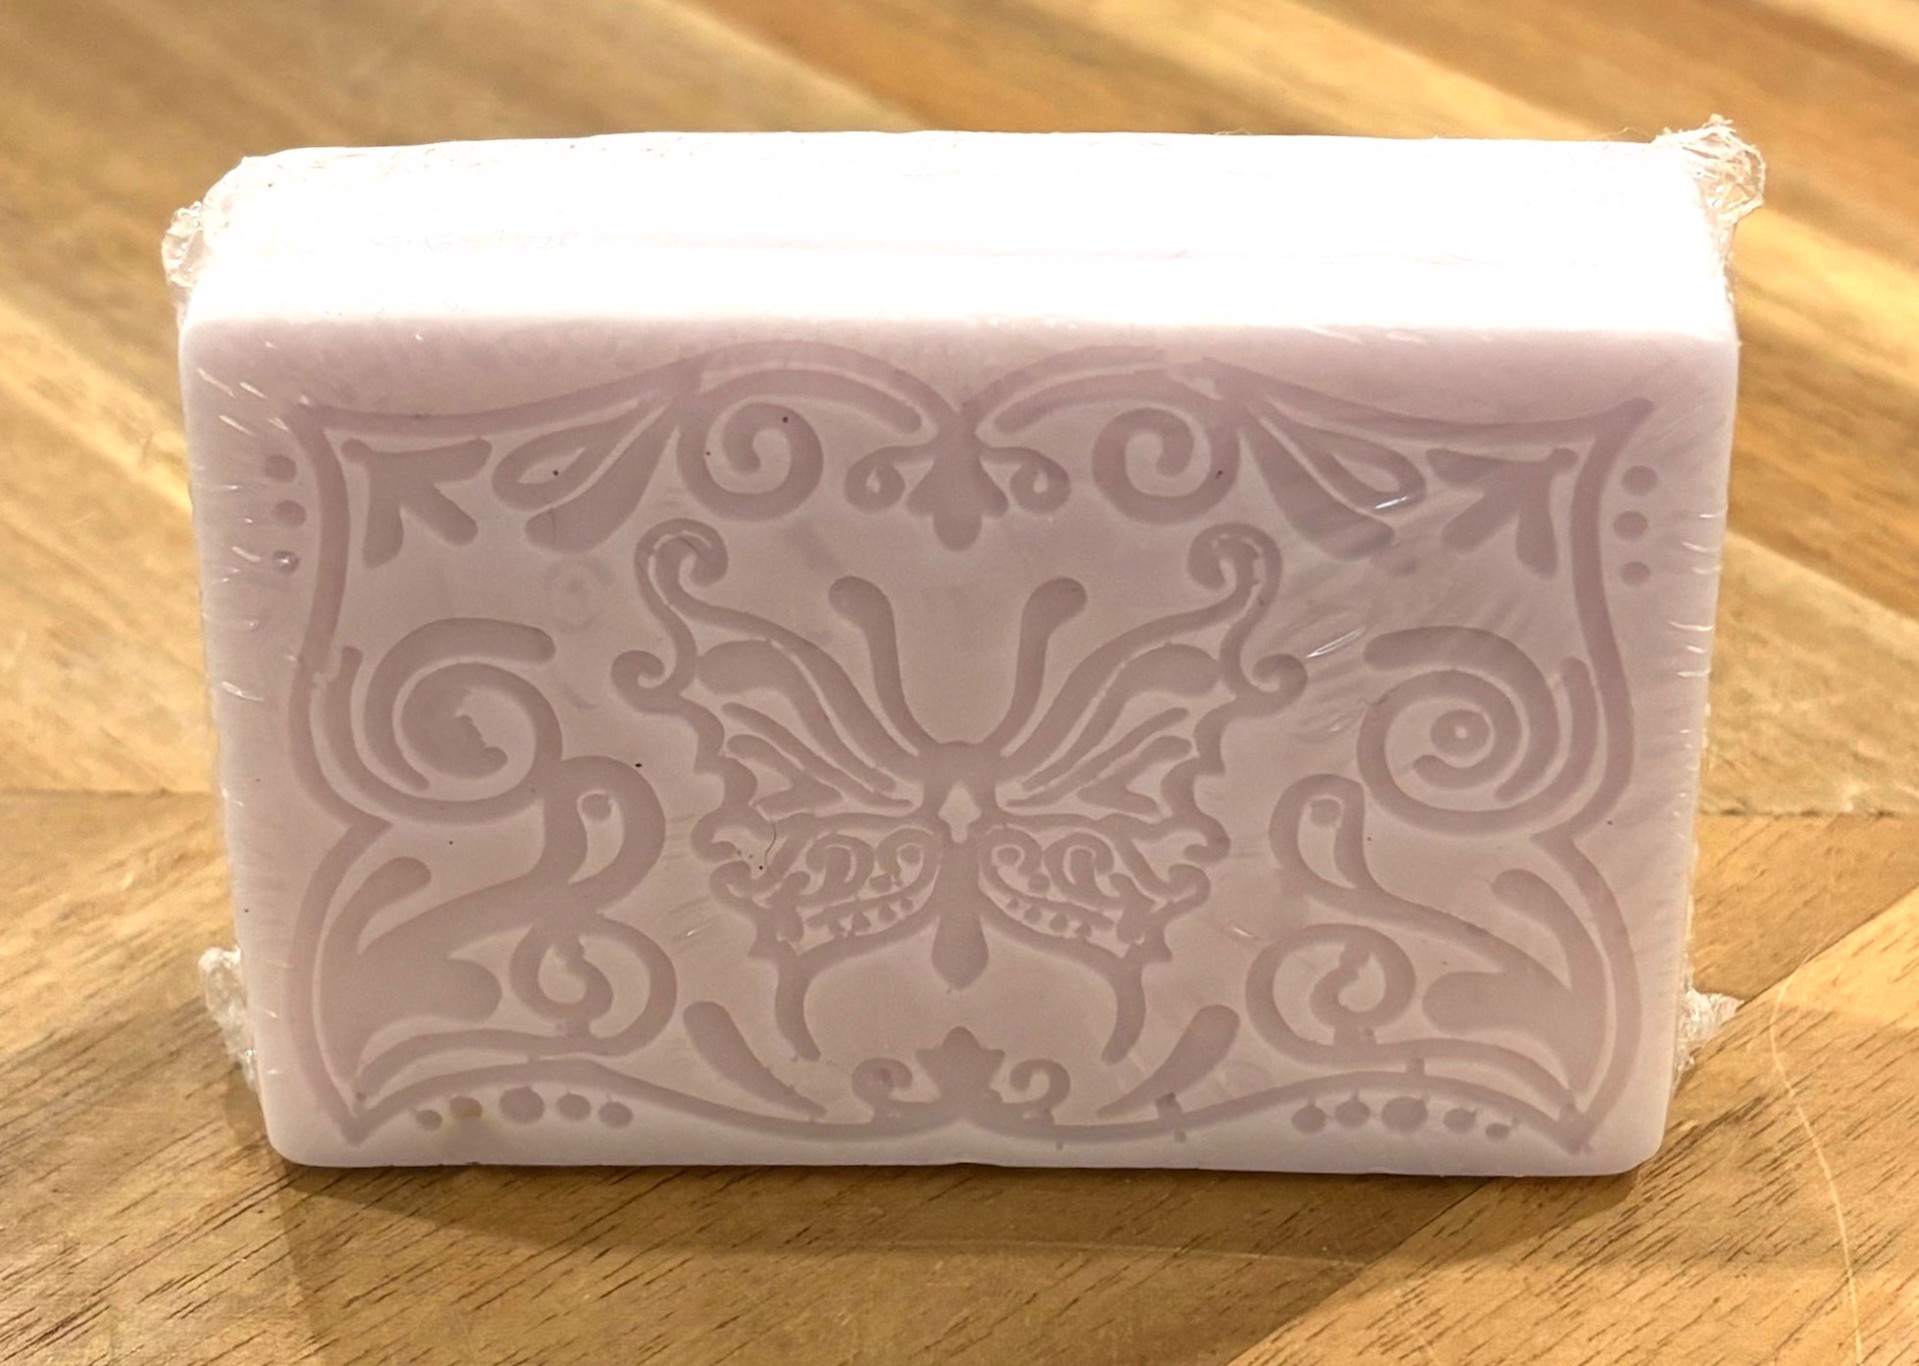 Lavender Lullaby Bar Soap by The Honeysuckle Barn